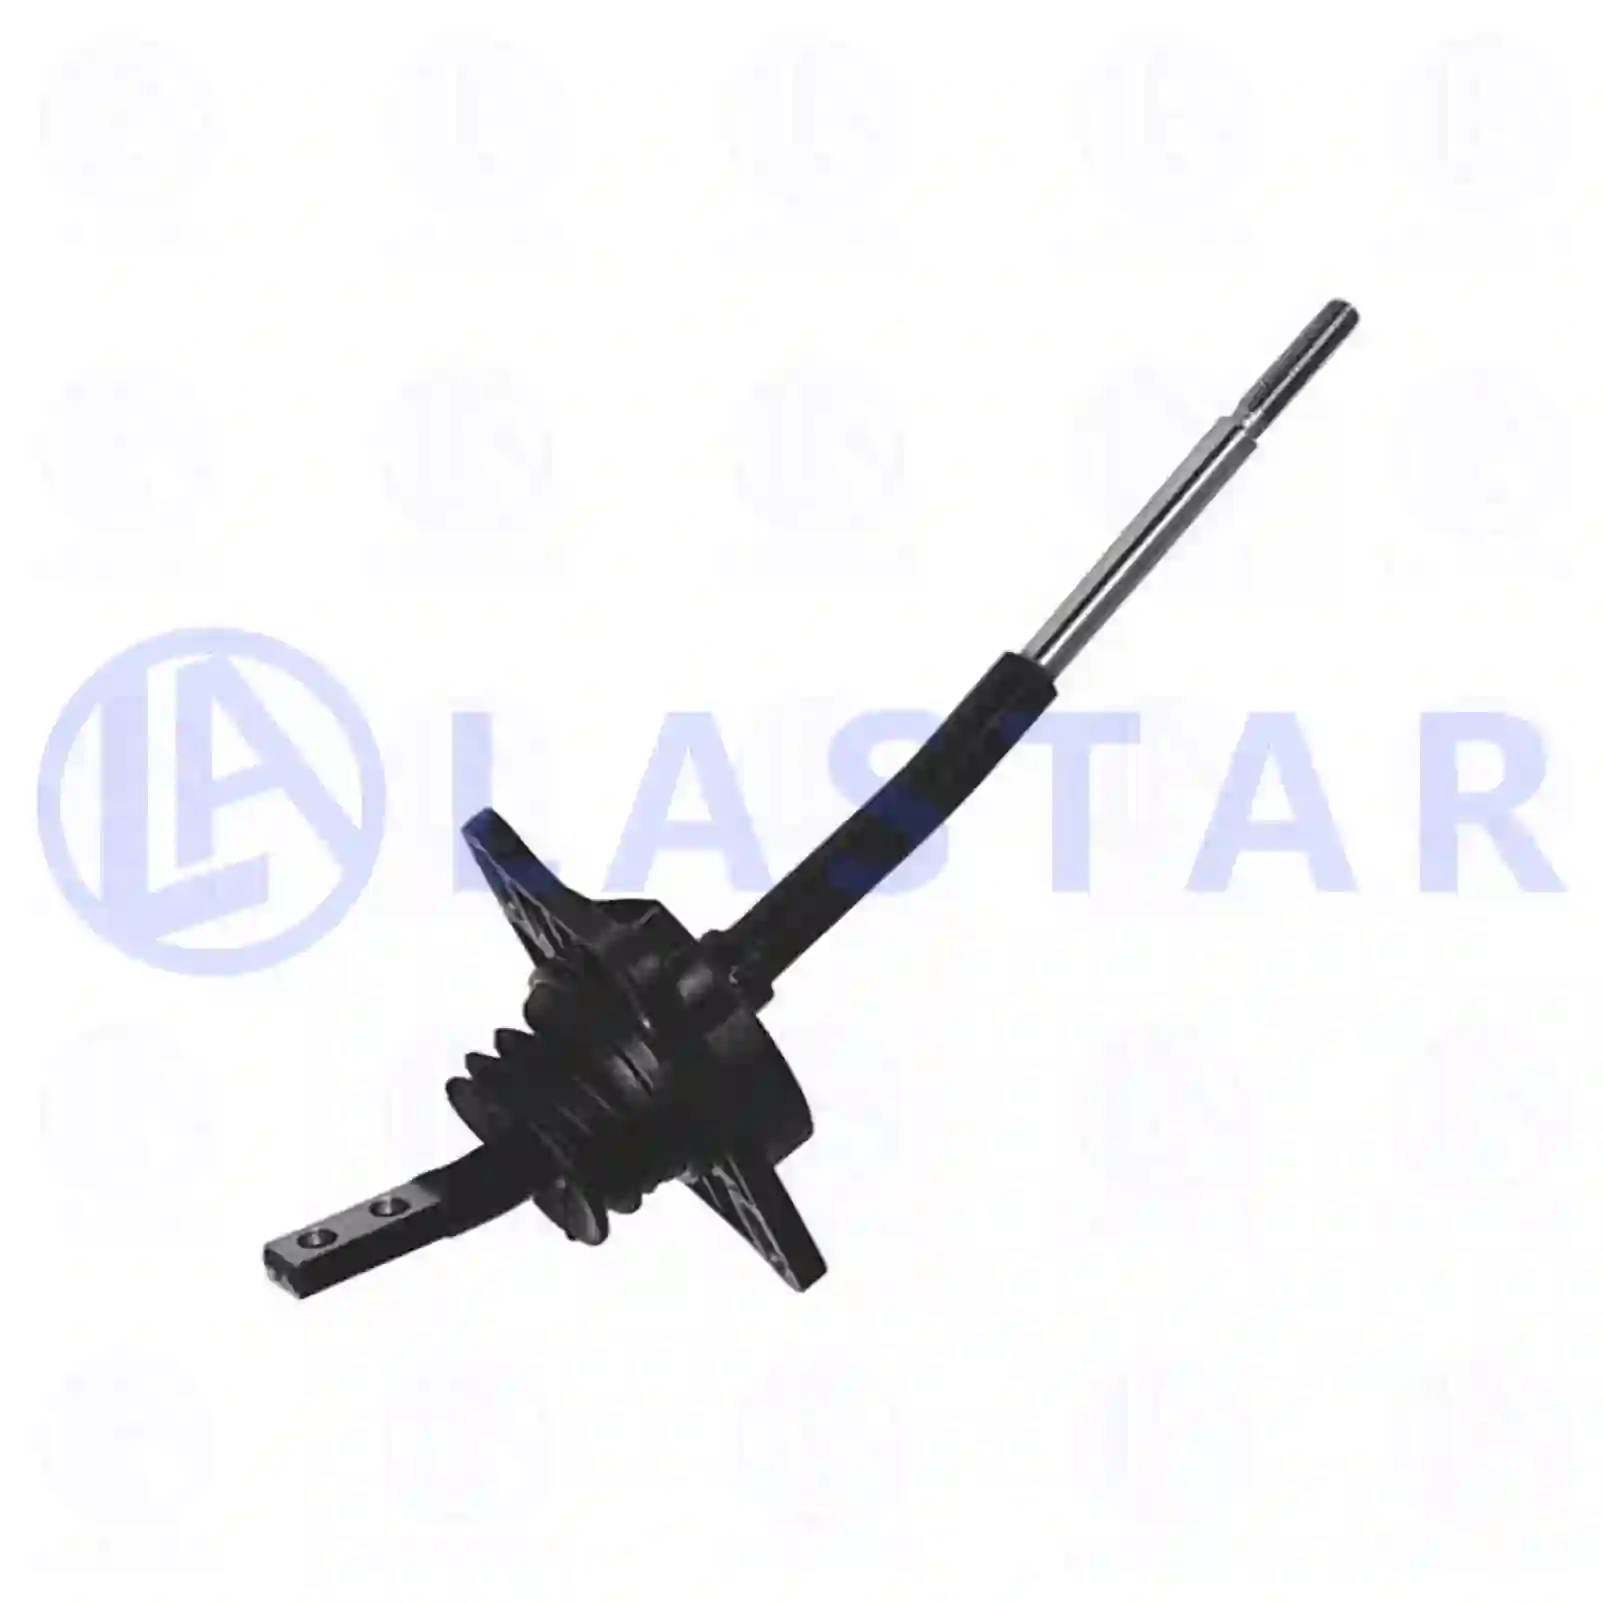 Gear shift lever, 77733489, 41210621 ||  77733489 Lastar Spare Part | Truck Spare Parts, Auotomotive Spare Parts Gear shift lever, 77733489, 41210621 ||  77733489 Lastar Spare Part | Truck Spare Parts, Auotomotive Spare Parts